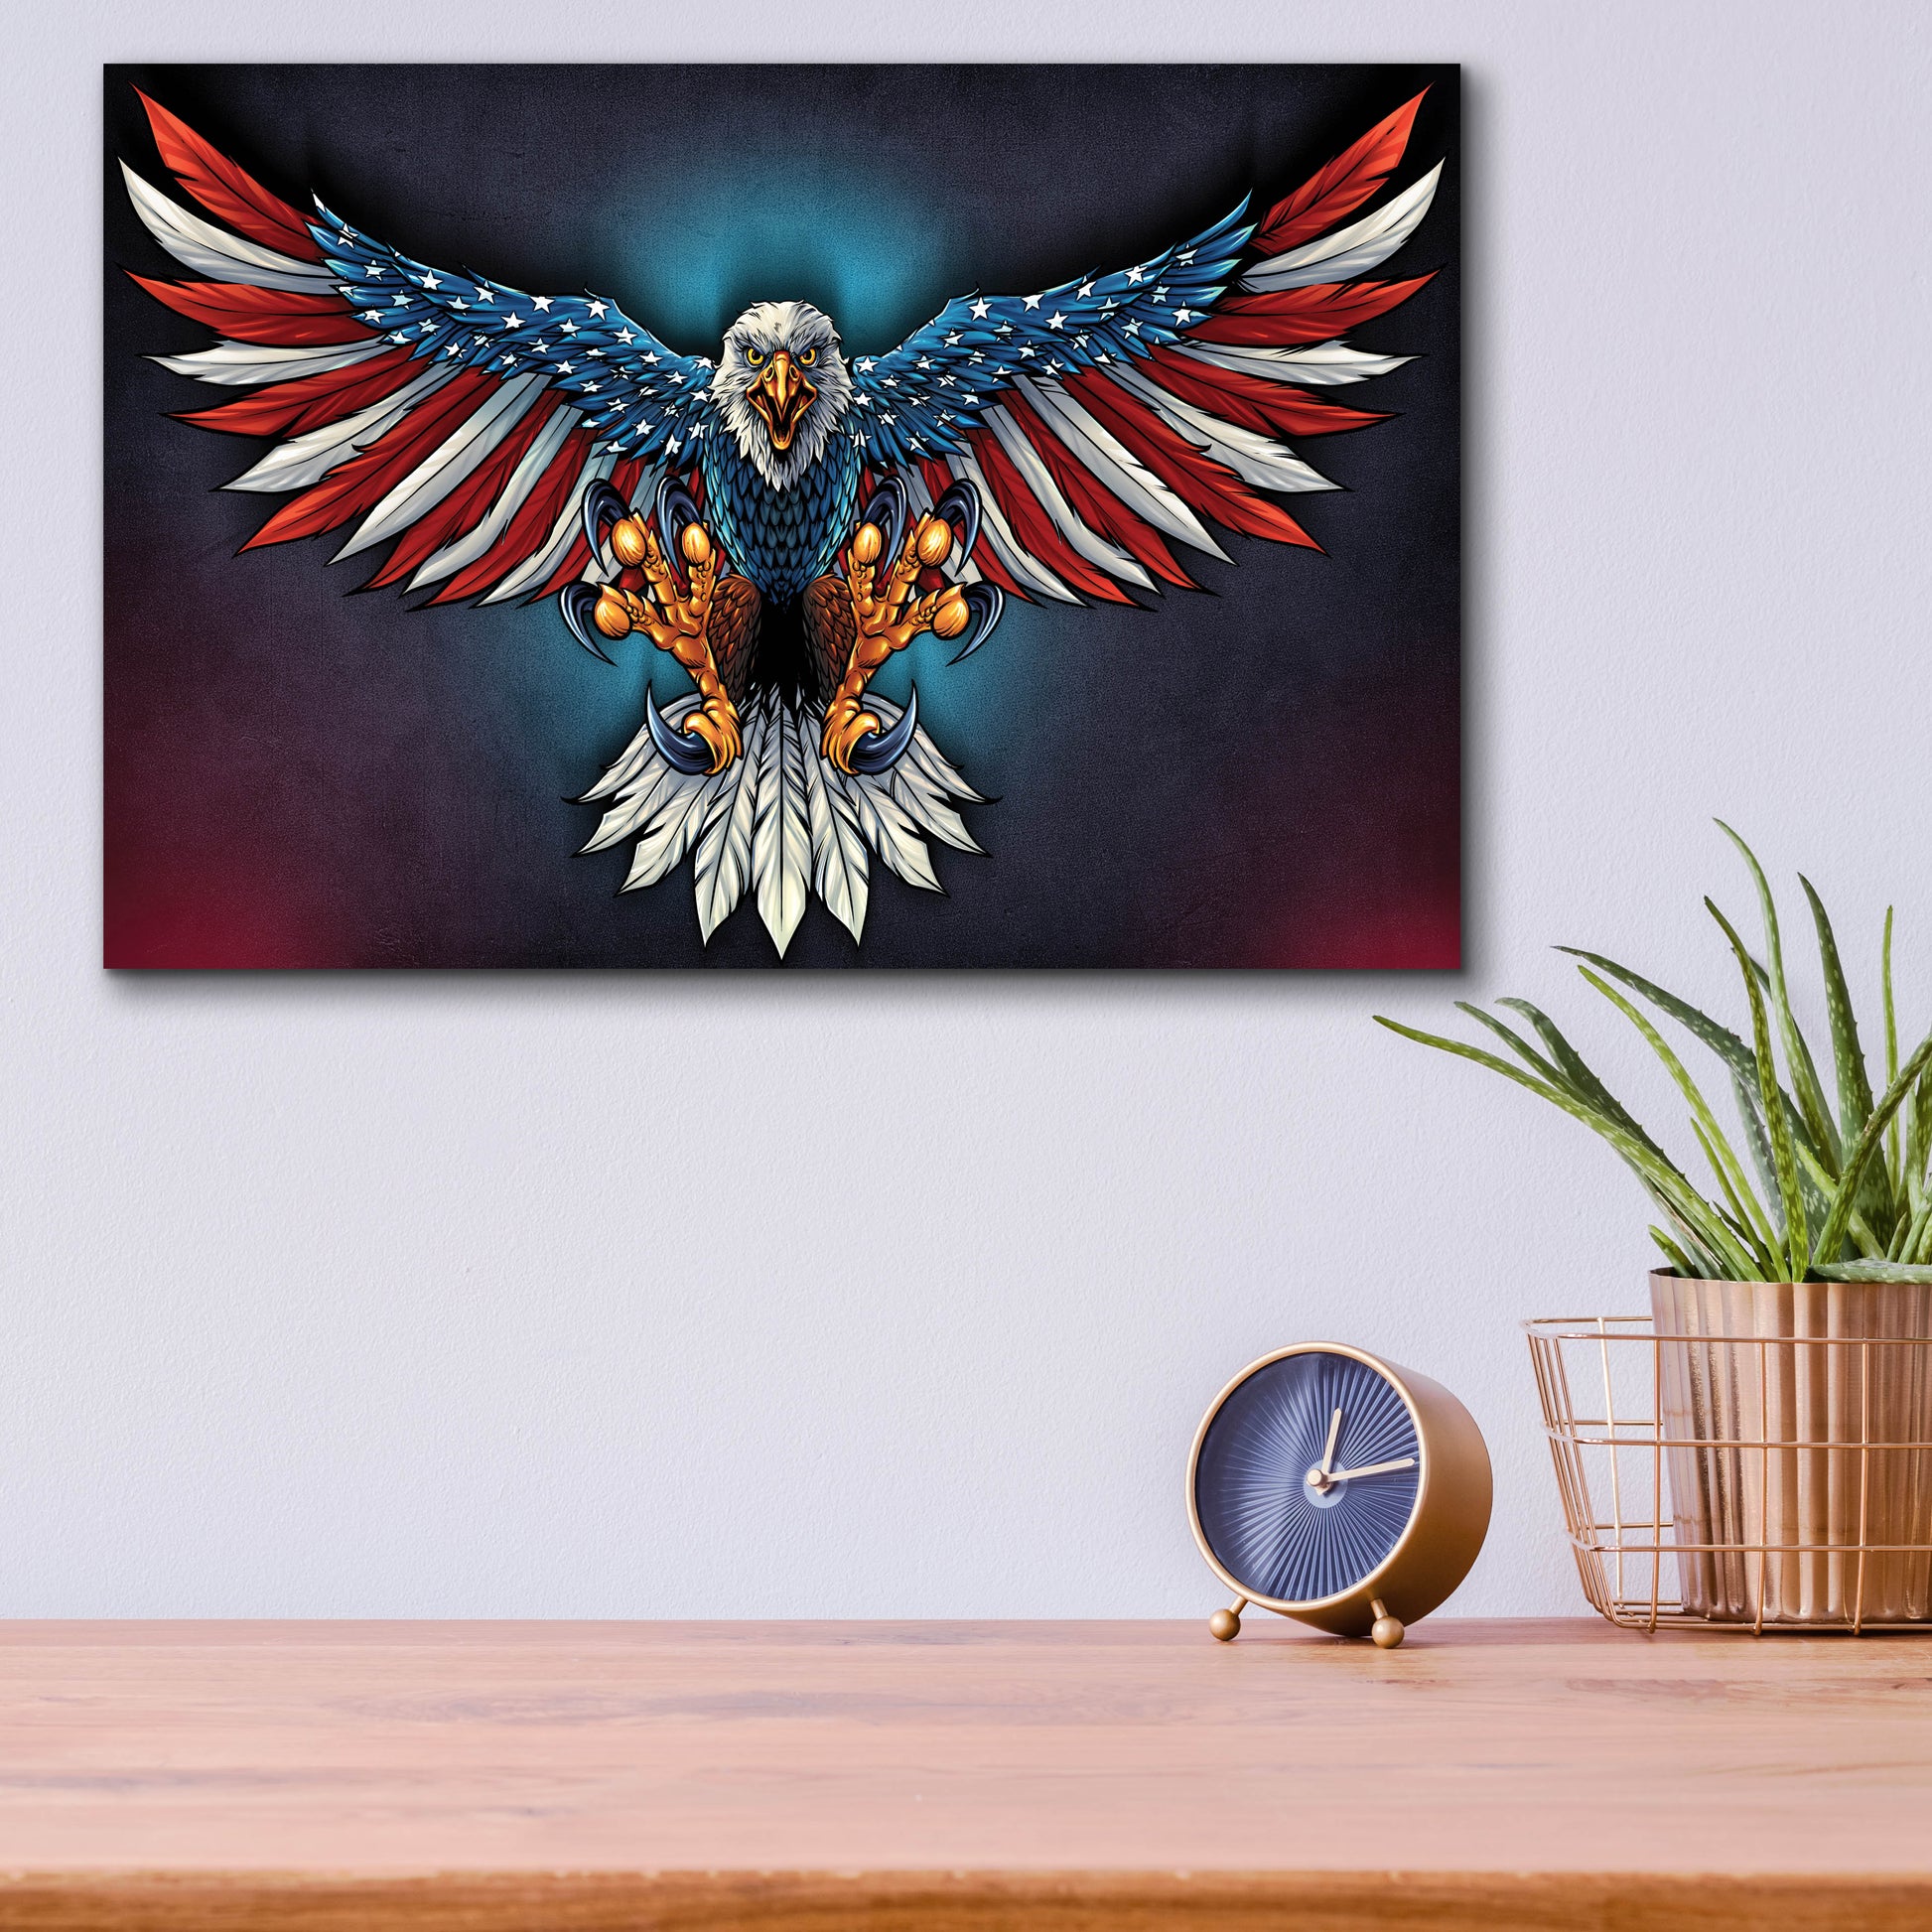 Epic Art 'Eagle With US Flag Wings Spread' by Flyland Designs, Acrylic Glass Wall Art,16x12